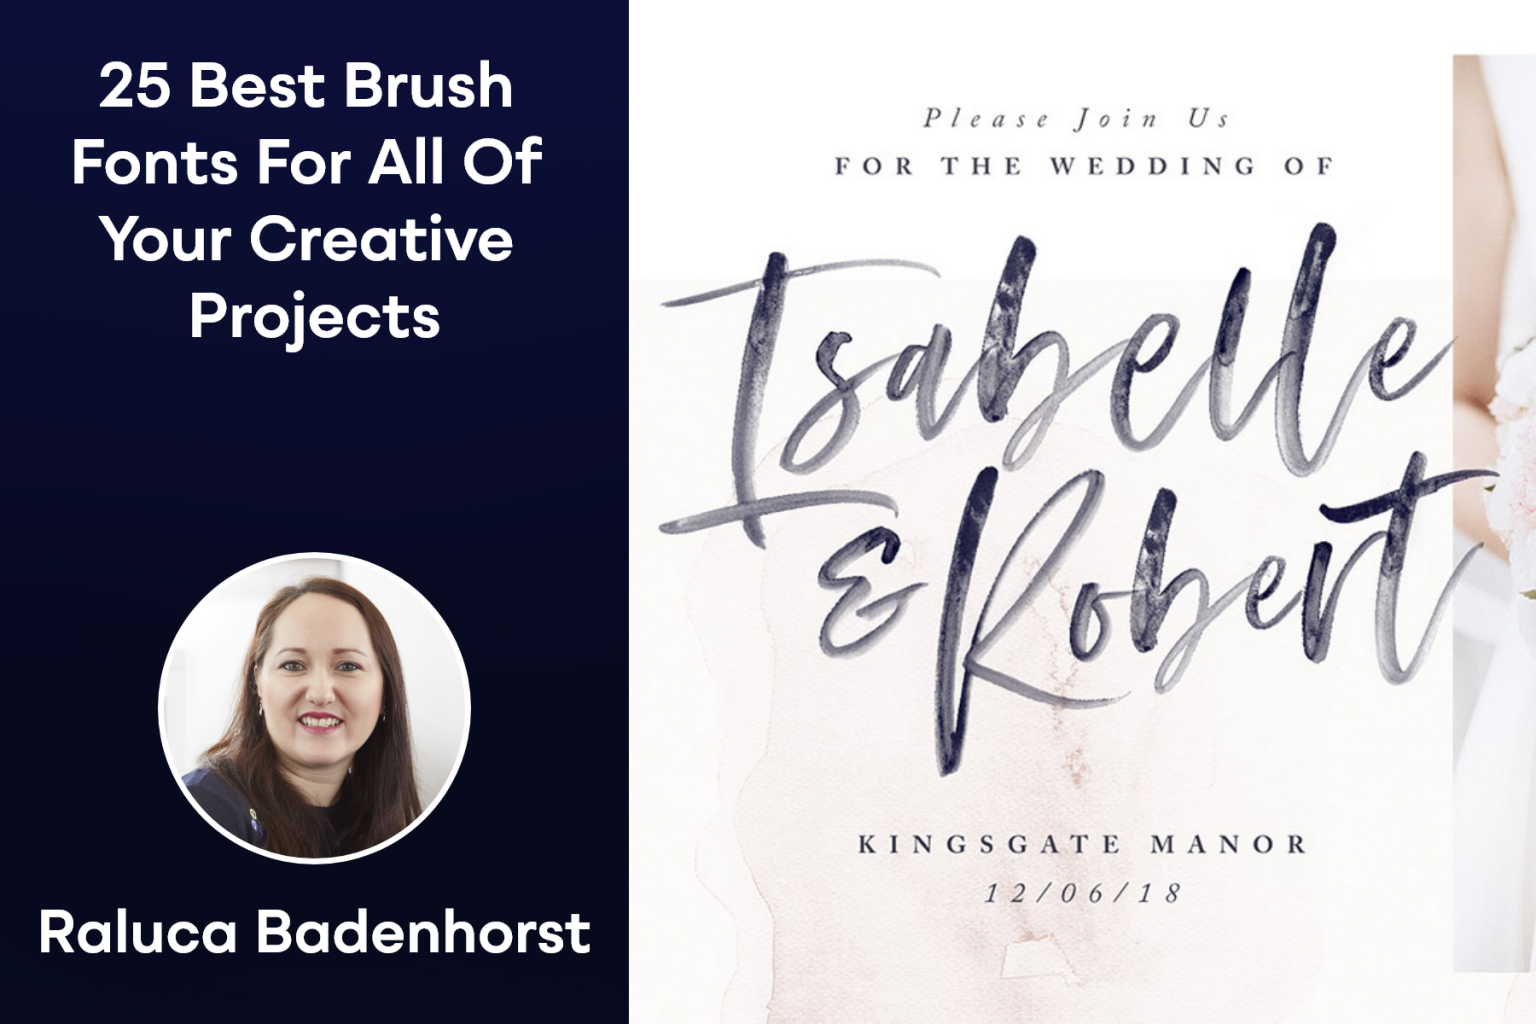 25 Best Brush Fonts For All Of Your Creative Projects